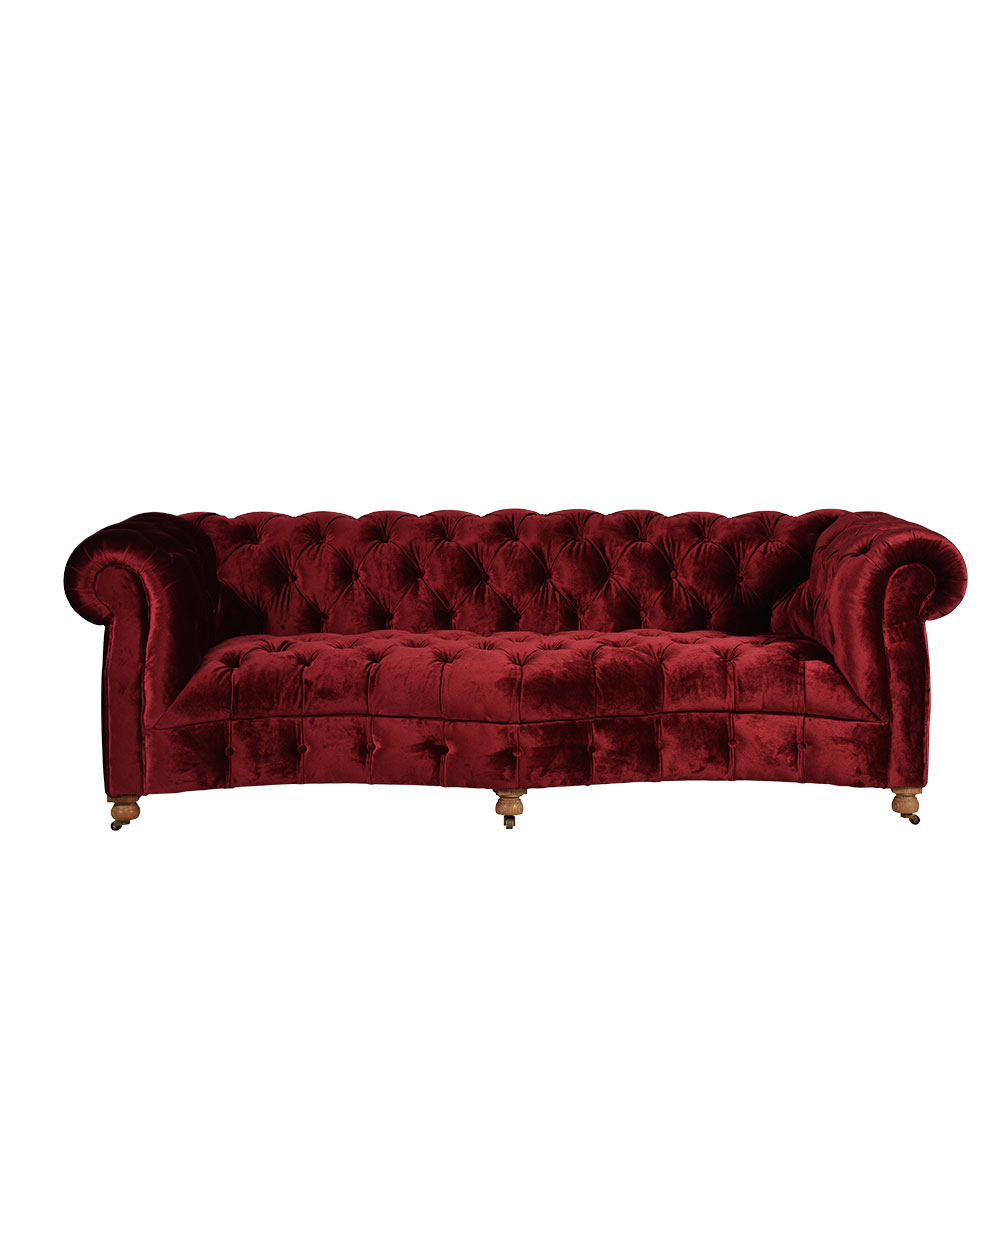 Timothy Oulton sofa, from Dawson's Furniture